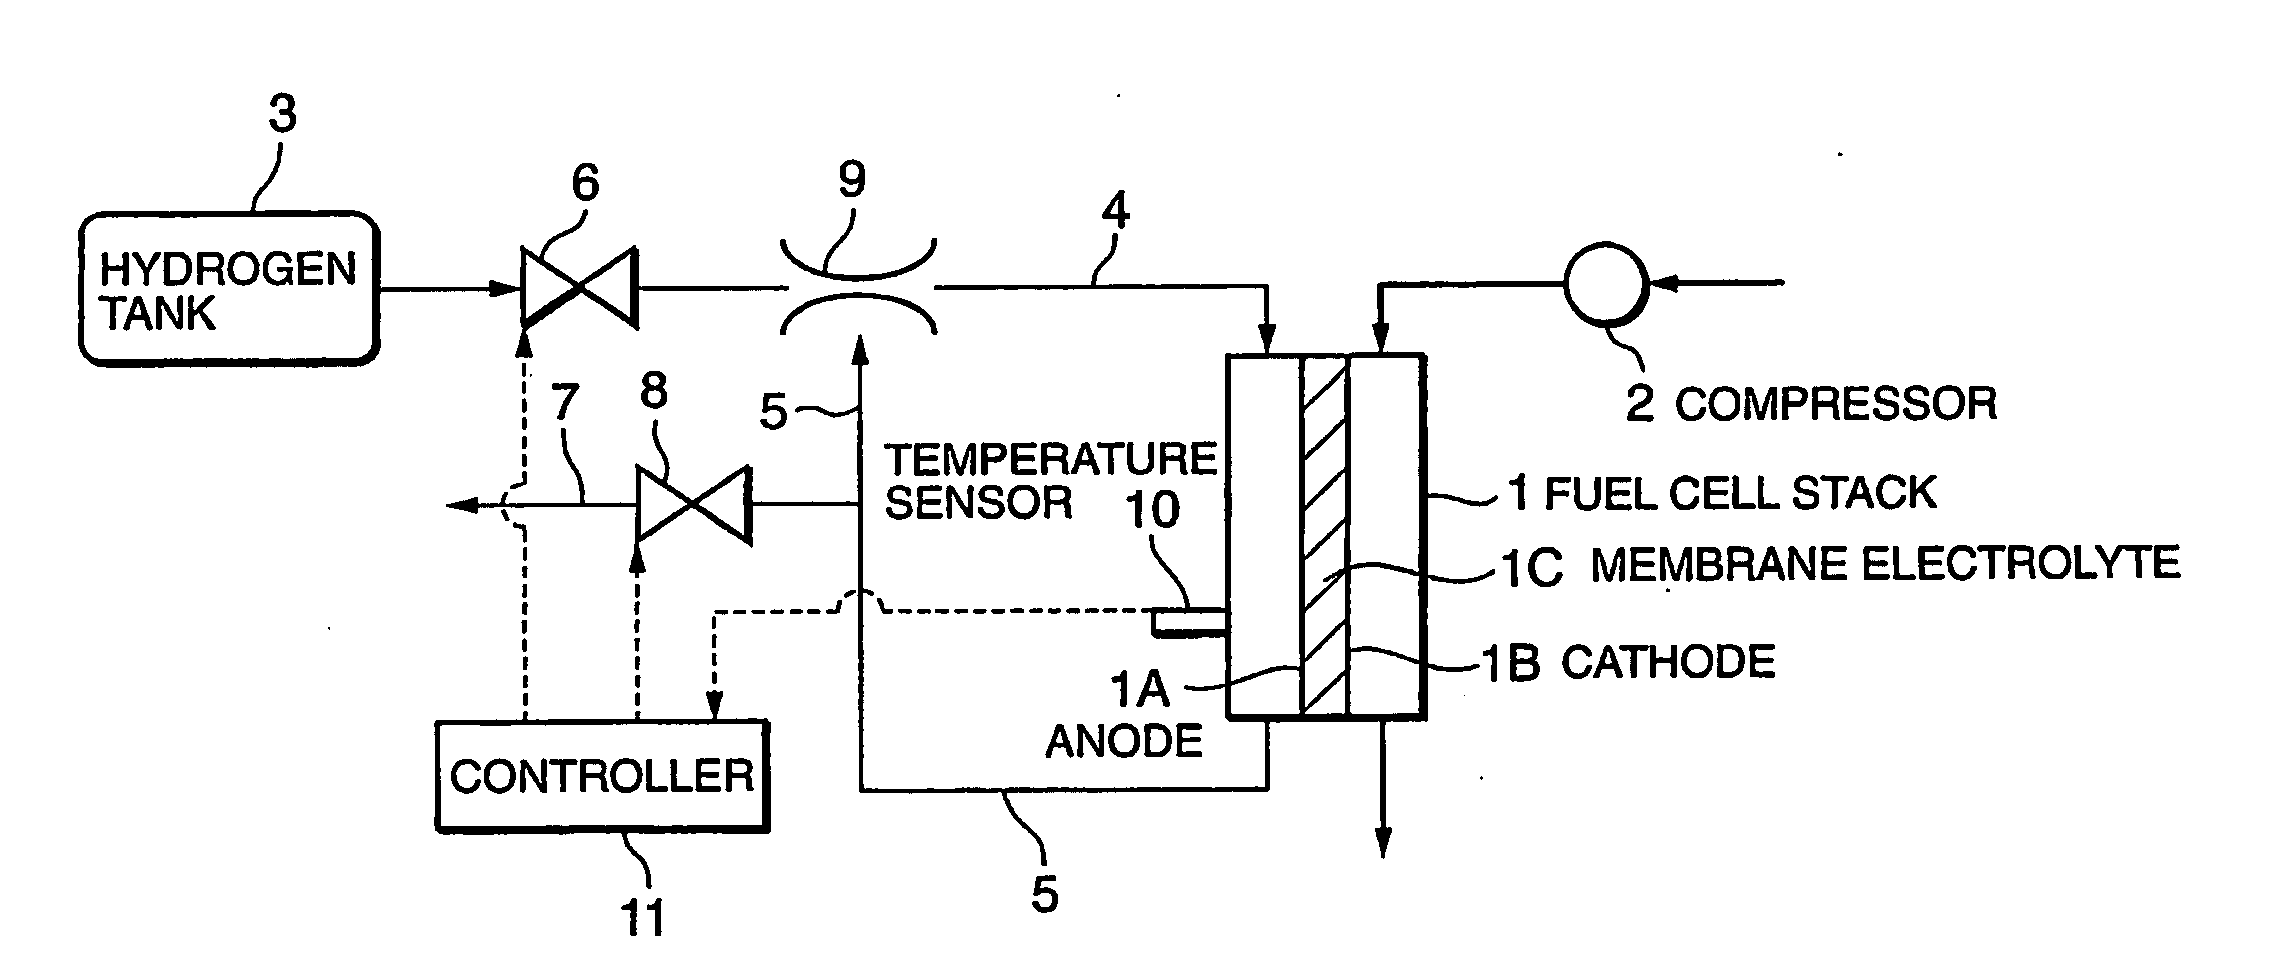 Anode effluent control in fuel cell power plant